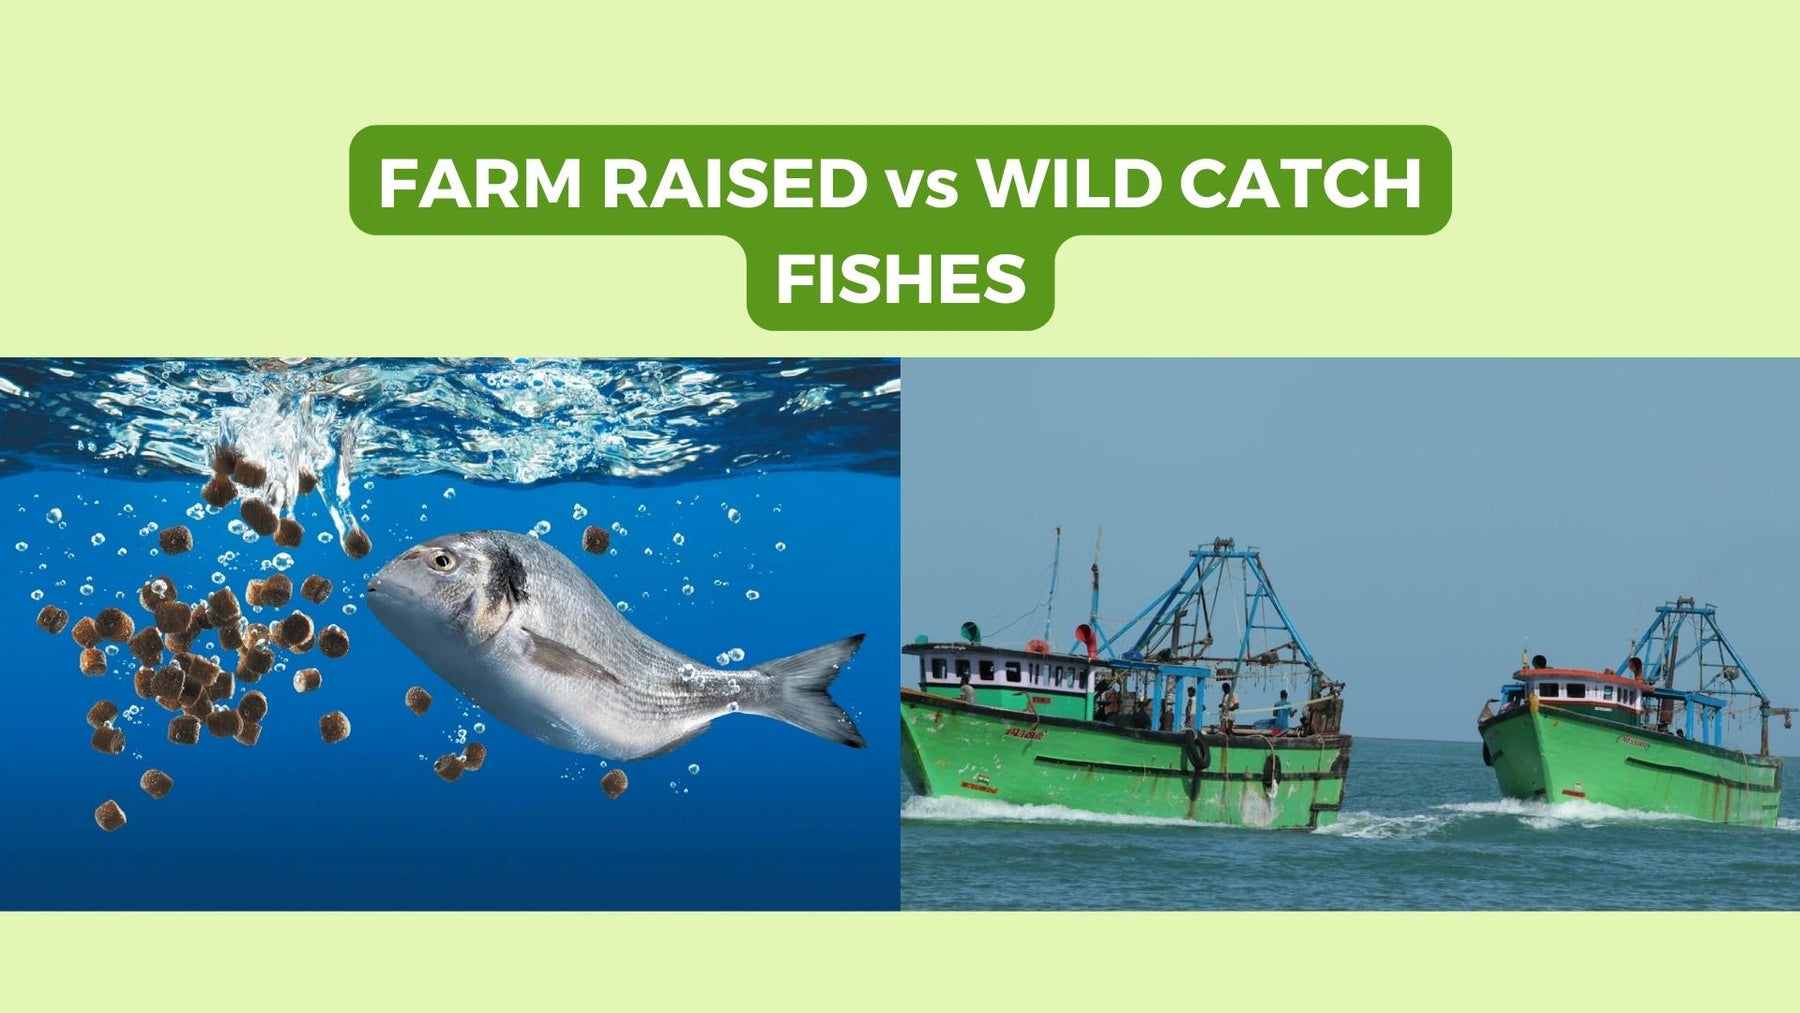 Difference between Farm-raised & Wild-catch Fishes